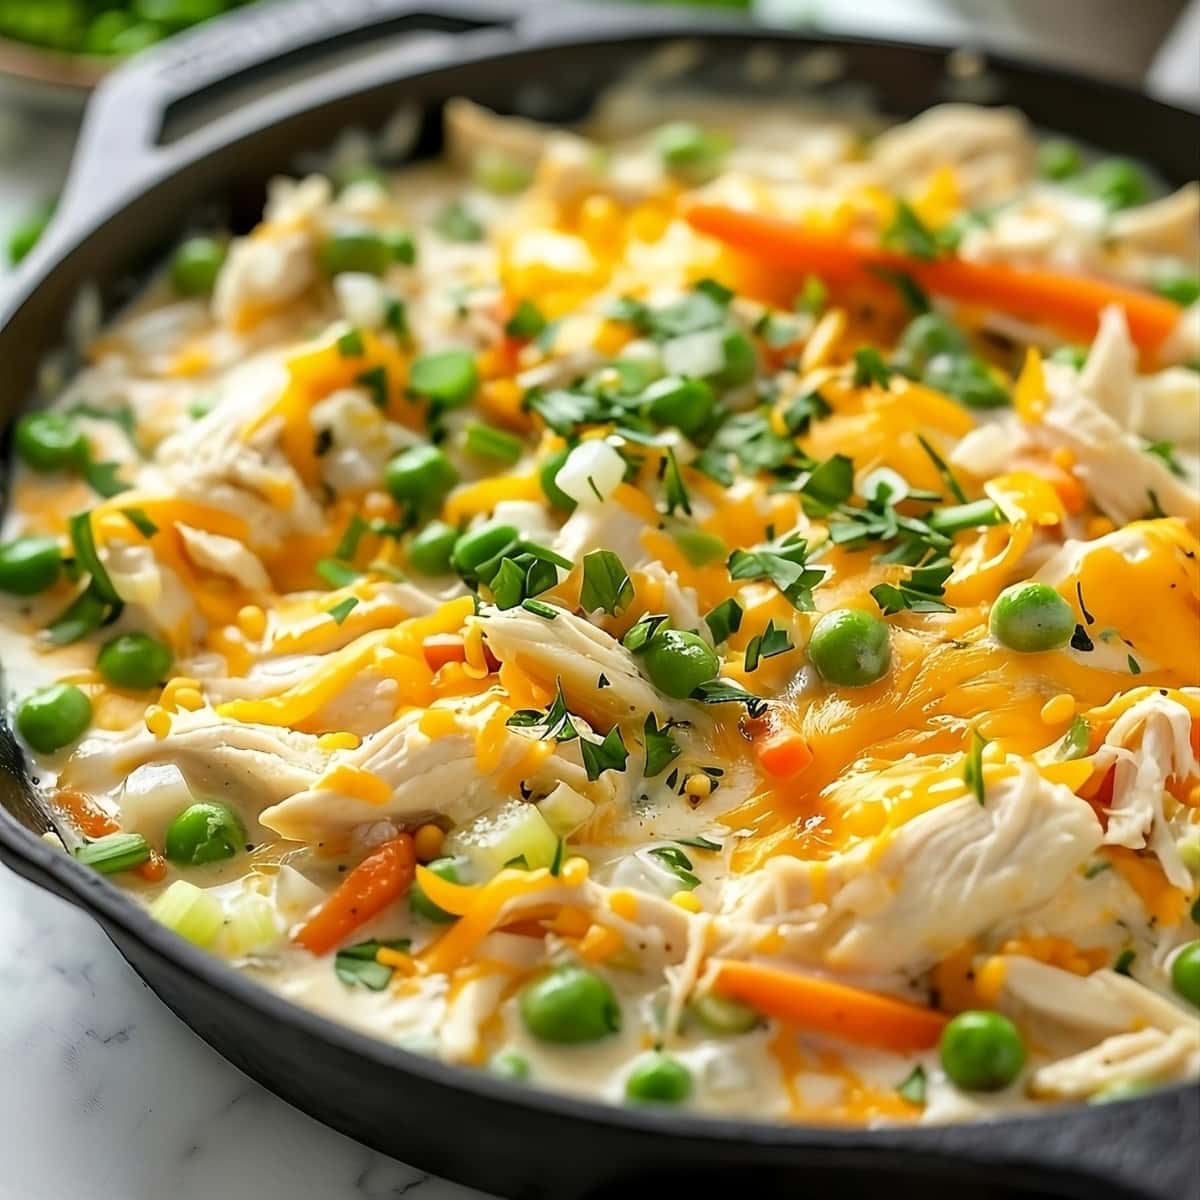 Chicken and biscuit casserole filling in a cast iron skillet with shredded chicken, frozen peas, and cheddar cheese, carrots and chopped parsley.